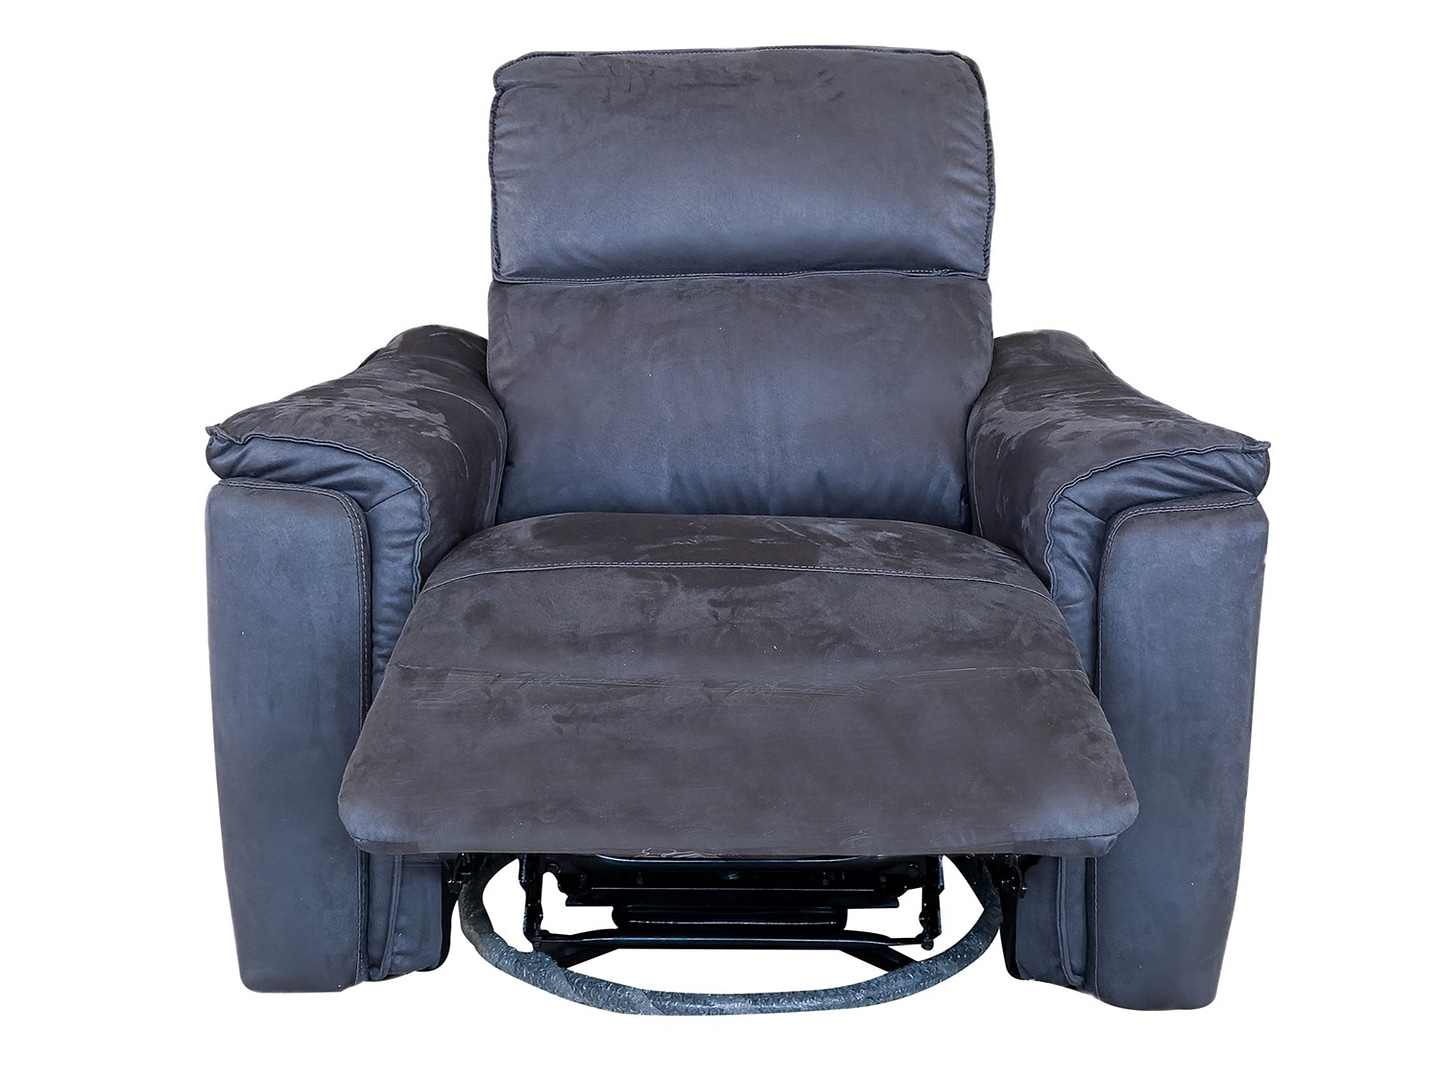 RIVIERA Recliner Chair - Front